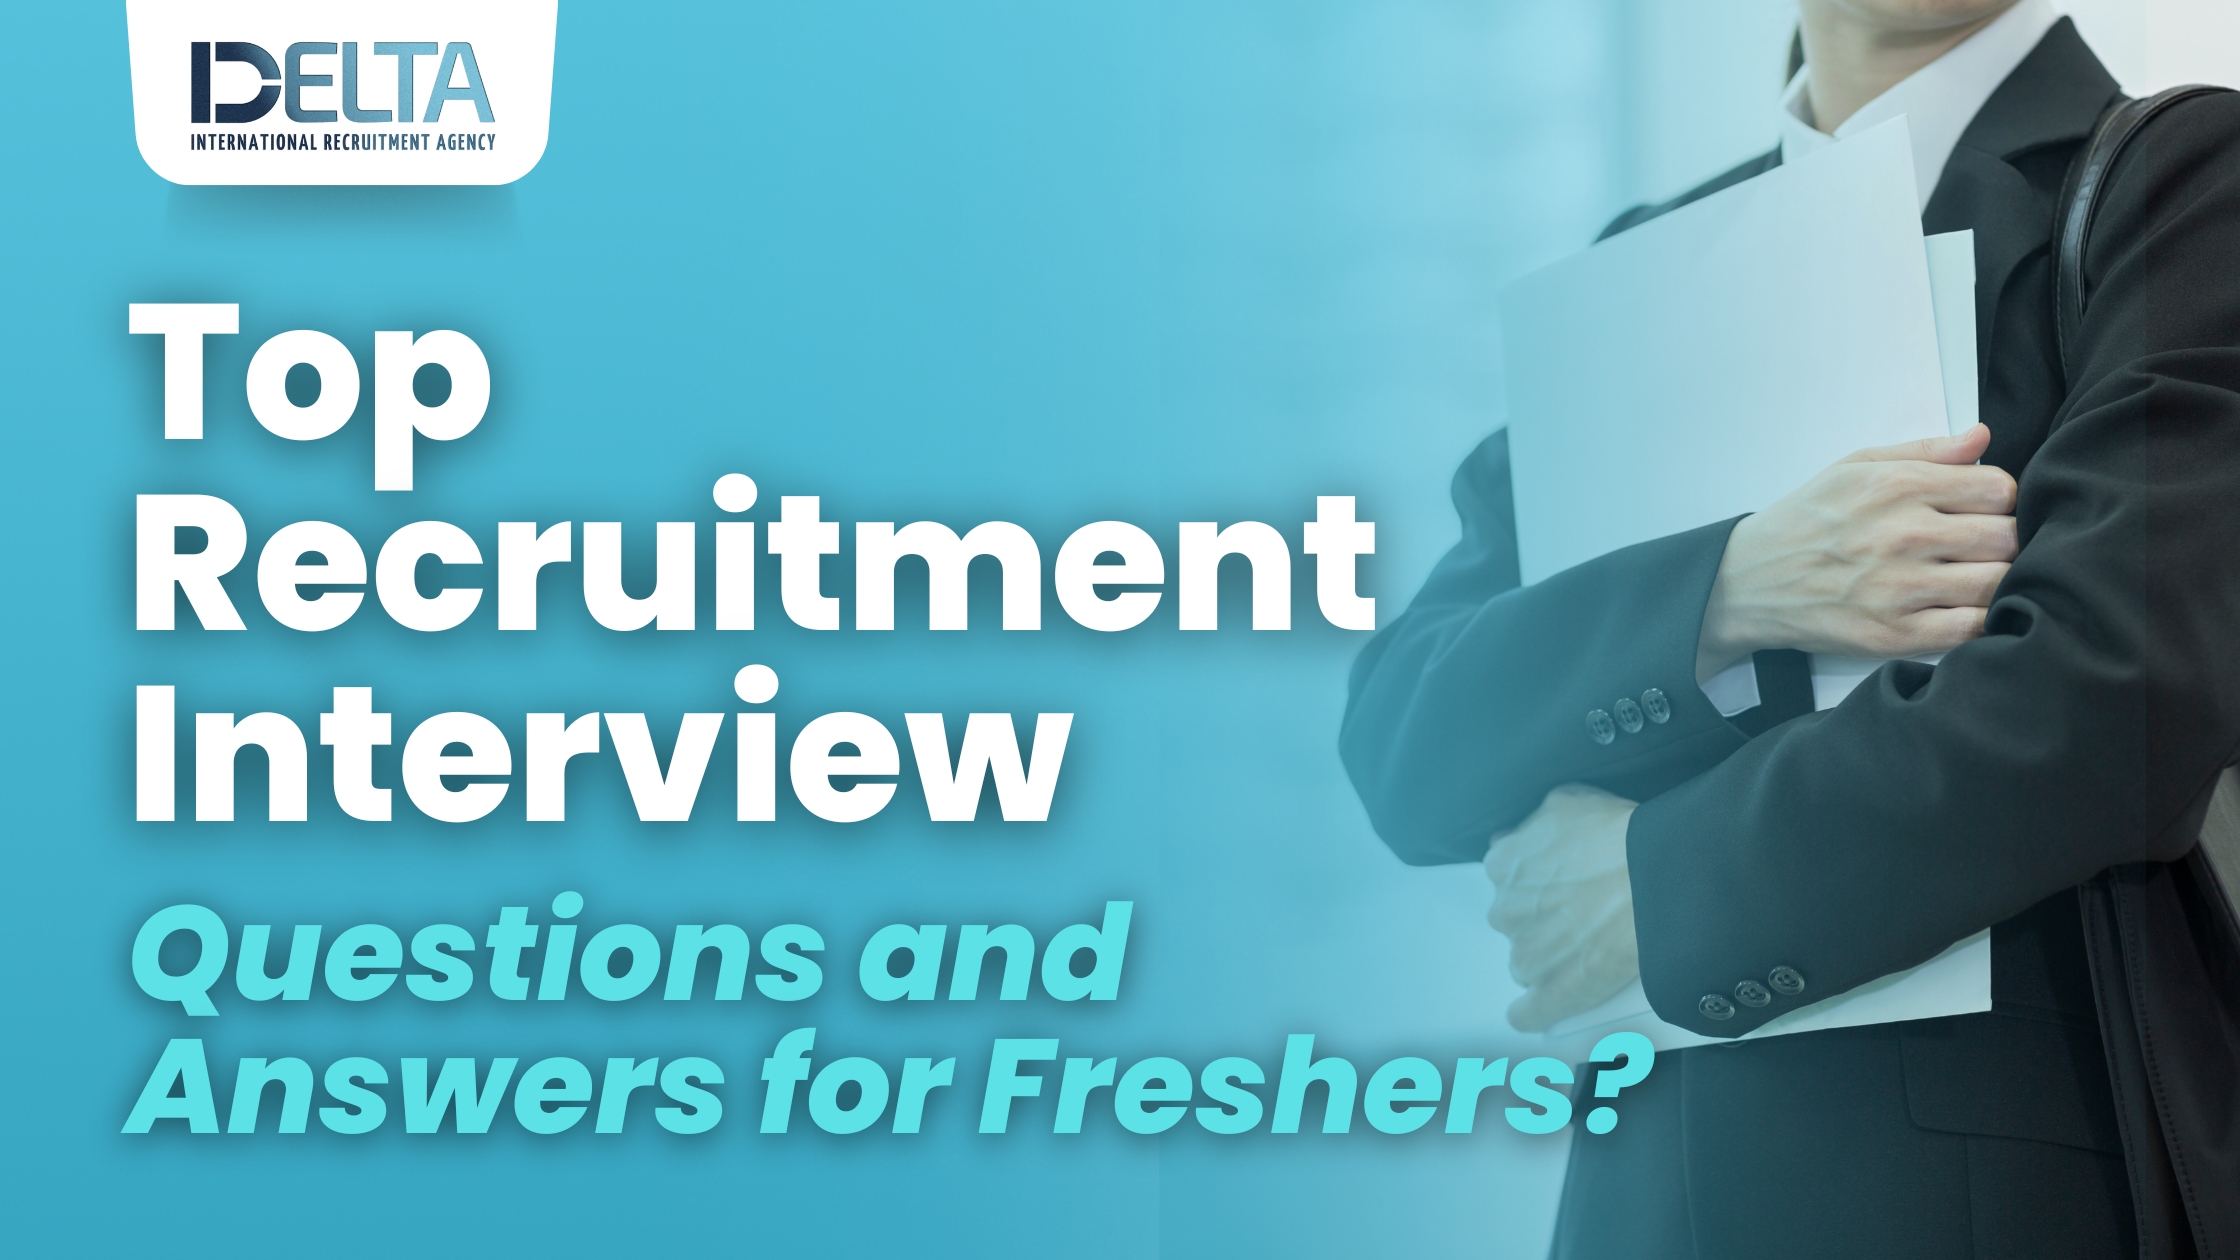 Top Recruitment Interview Questions and Answers for Freshers?